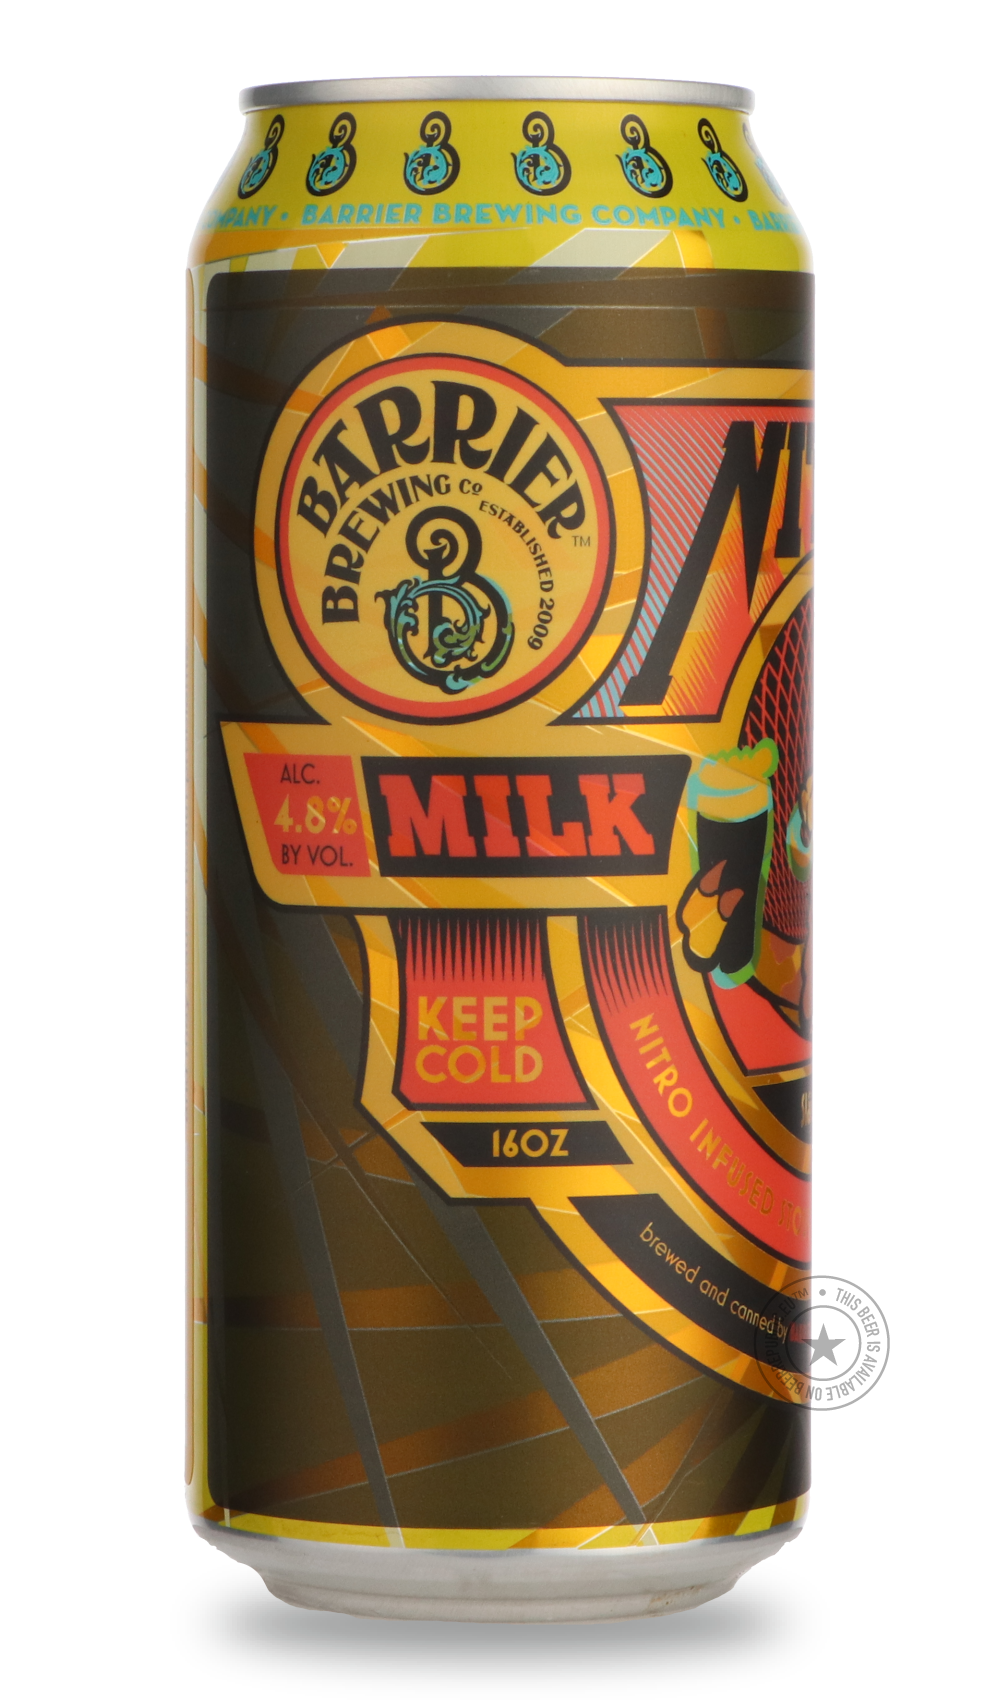 -Barrier- Nitro Milk Stout-Stout & Porter- Only @ Beer Republic - The best online beer store for American & Canadian craft beer - Buy beer online from the USA and Canada - Bier online kopen - Amerikaans bier kopen - Craft beer store - Craft beer kopen - Amerikanisch bier kaufen - Bier online kaufen - Acheter biere online - IPA - Stout - Porter - New England IPA - Hazy IPA - Imperial Stout - Barrel Aged - Barrel Aged Imperial Stout - Brown - Dark beer - Blond - Blonde - Pilsner - Lager - Wheat - Weizen - Amb